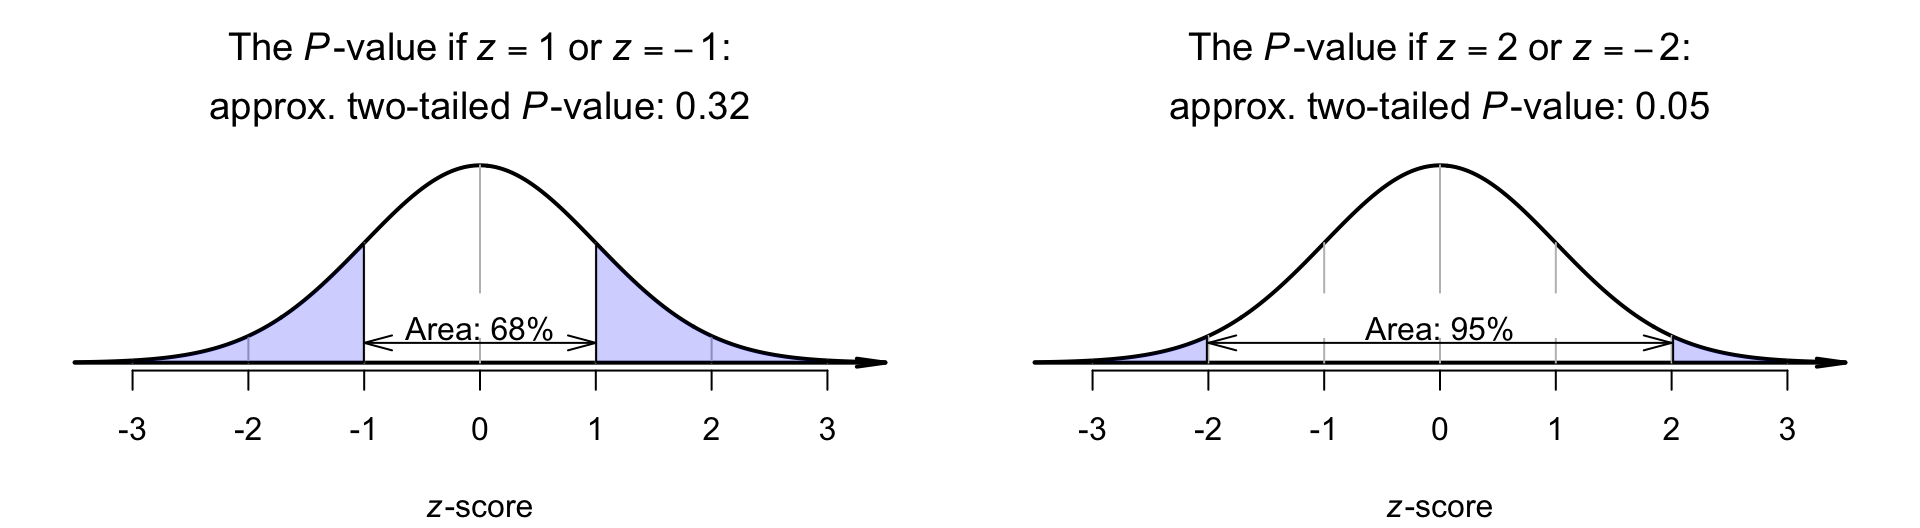 The two-tailed $P$-value is the combined area in the two tails of the distribution. Left panel: if $z = 1$ (or $z = -1$). Right panel: if $z = 2$ (or $z = -2$). (The one-tailed $P$-values are half the two-tailed $P$-values: $P = 0.16$ and $P = 0.025$.)